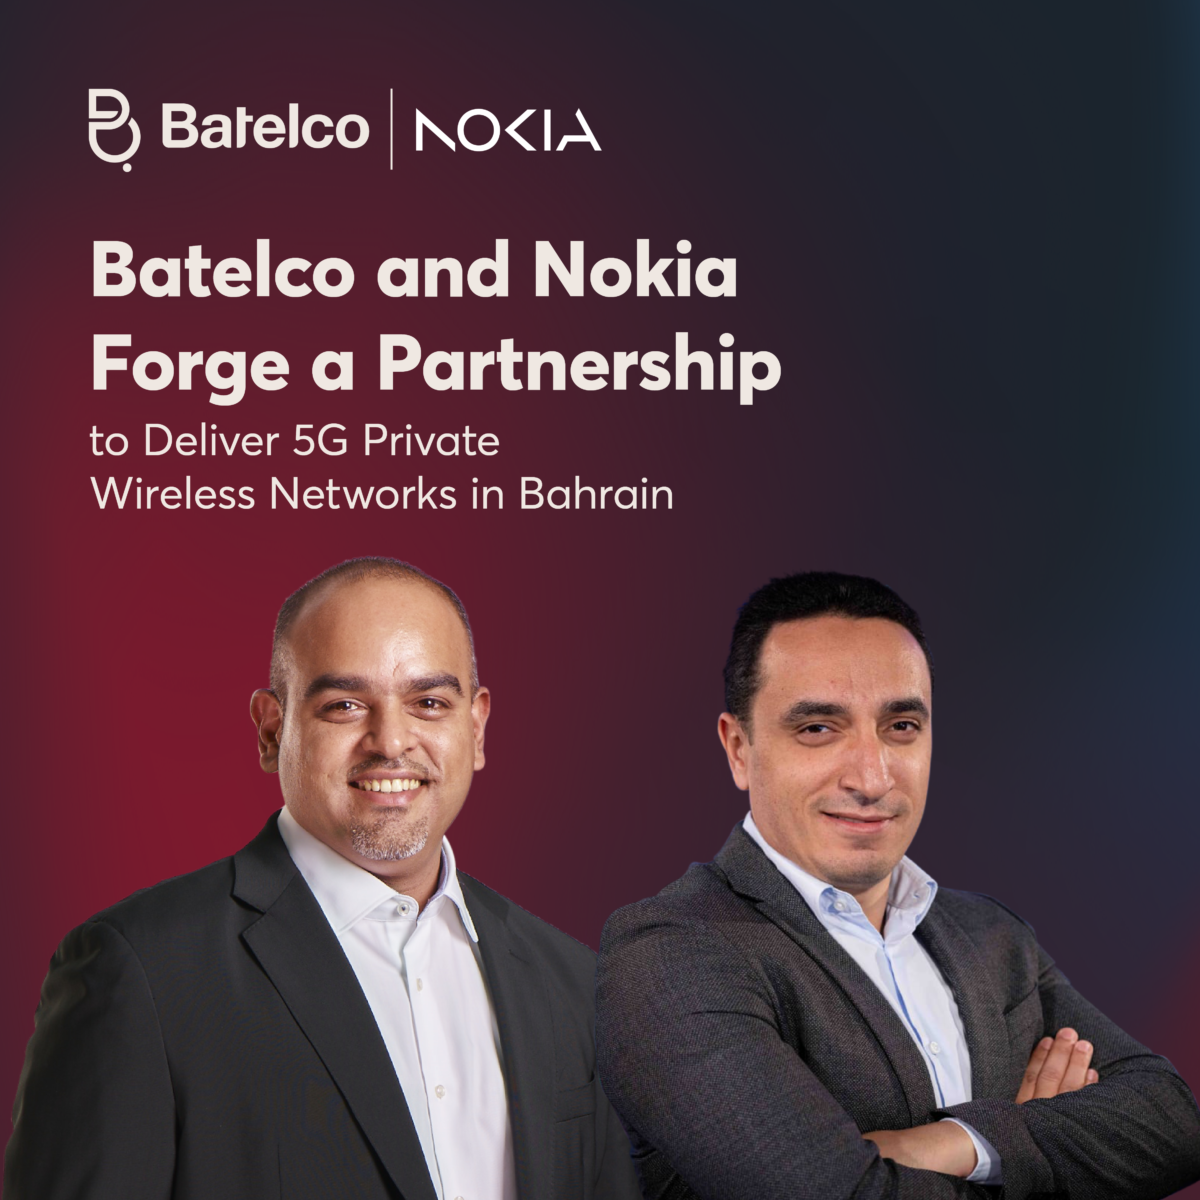 Batelco and Nokia Forge a Partnership to Deliver 5G Private Wireless Networks in Bahrain